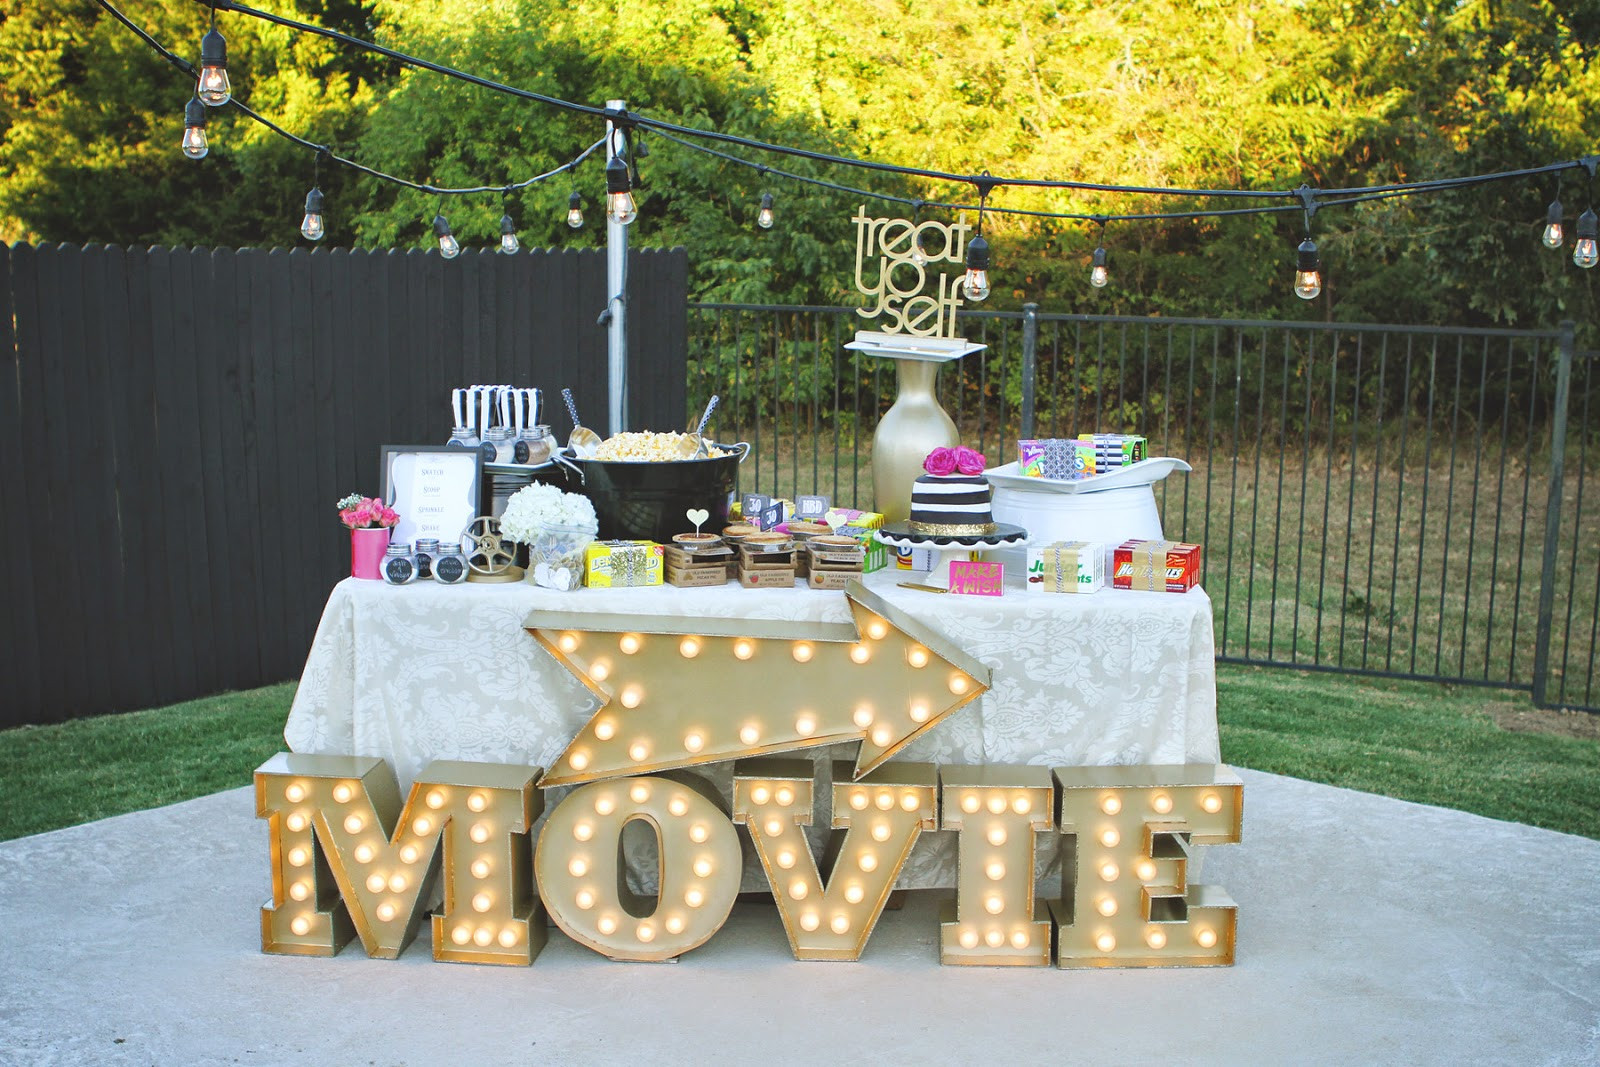 Backyard Party Ideas For Teens
 PB J Babes Movie Night Under the Stars